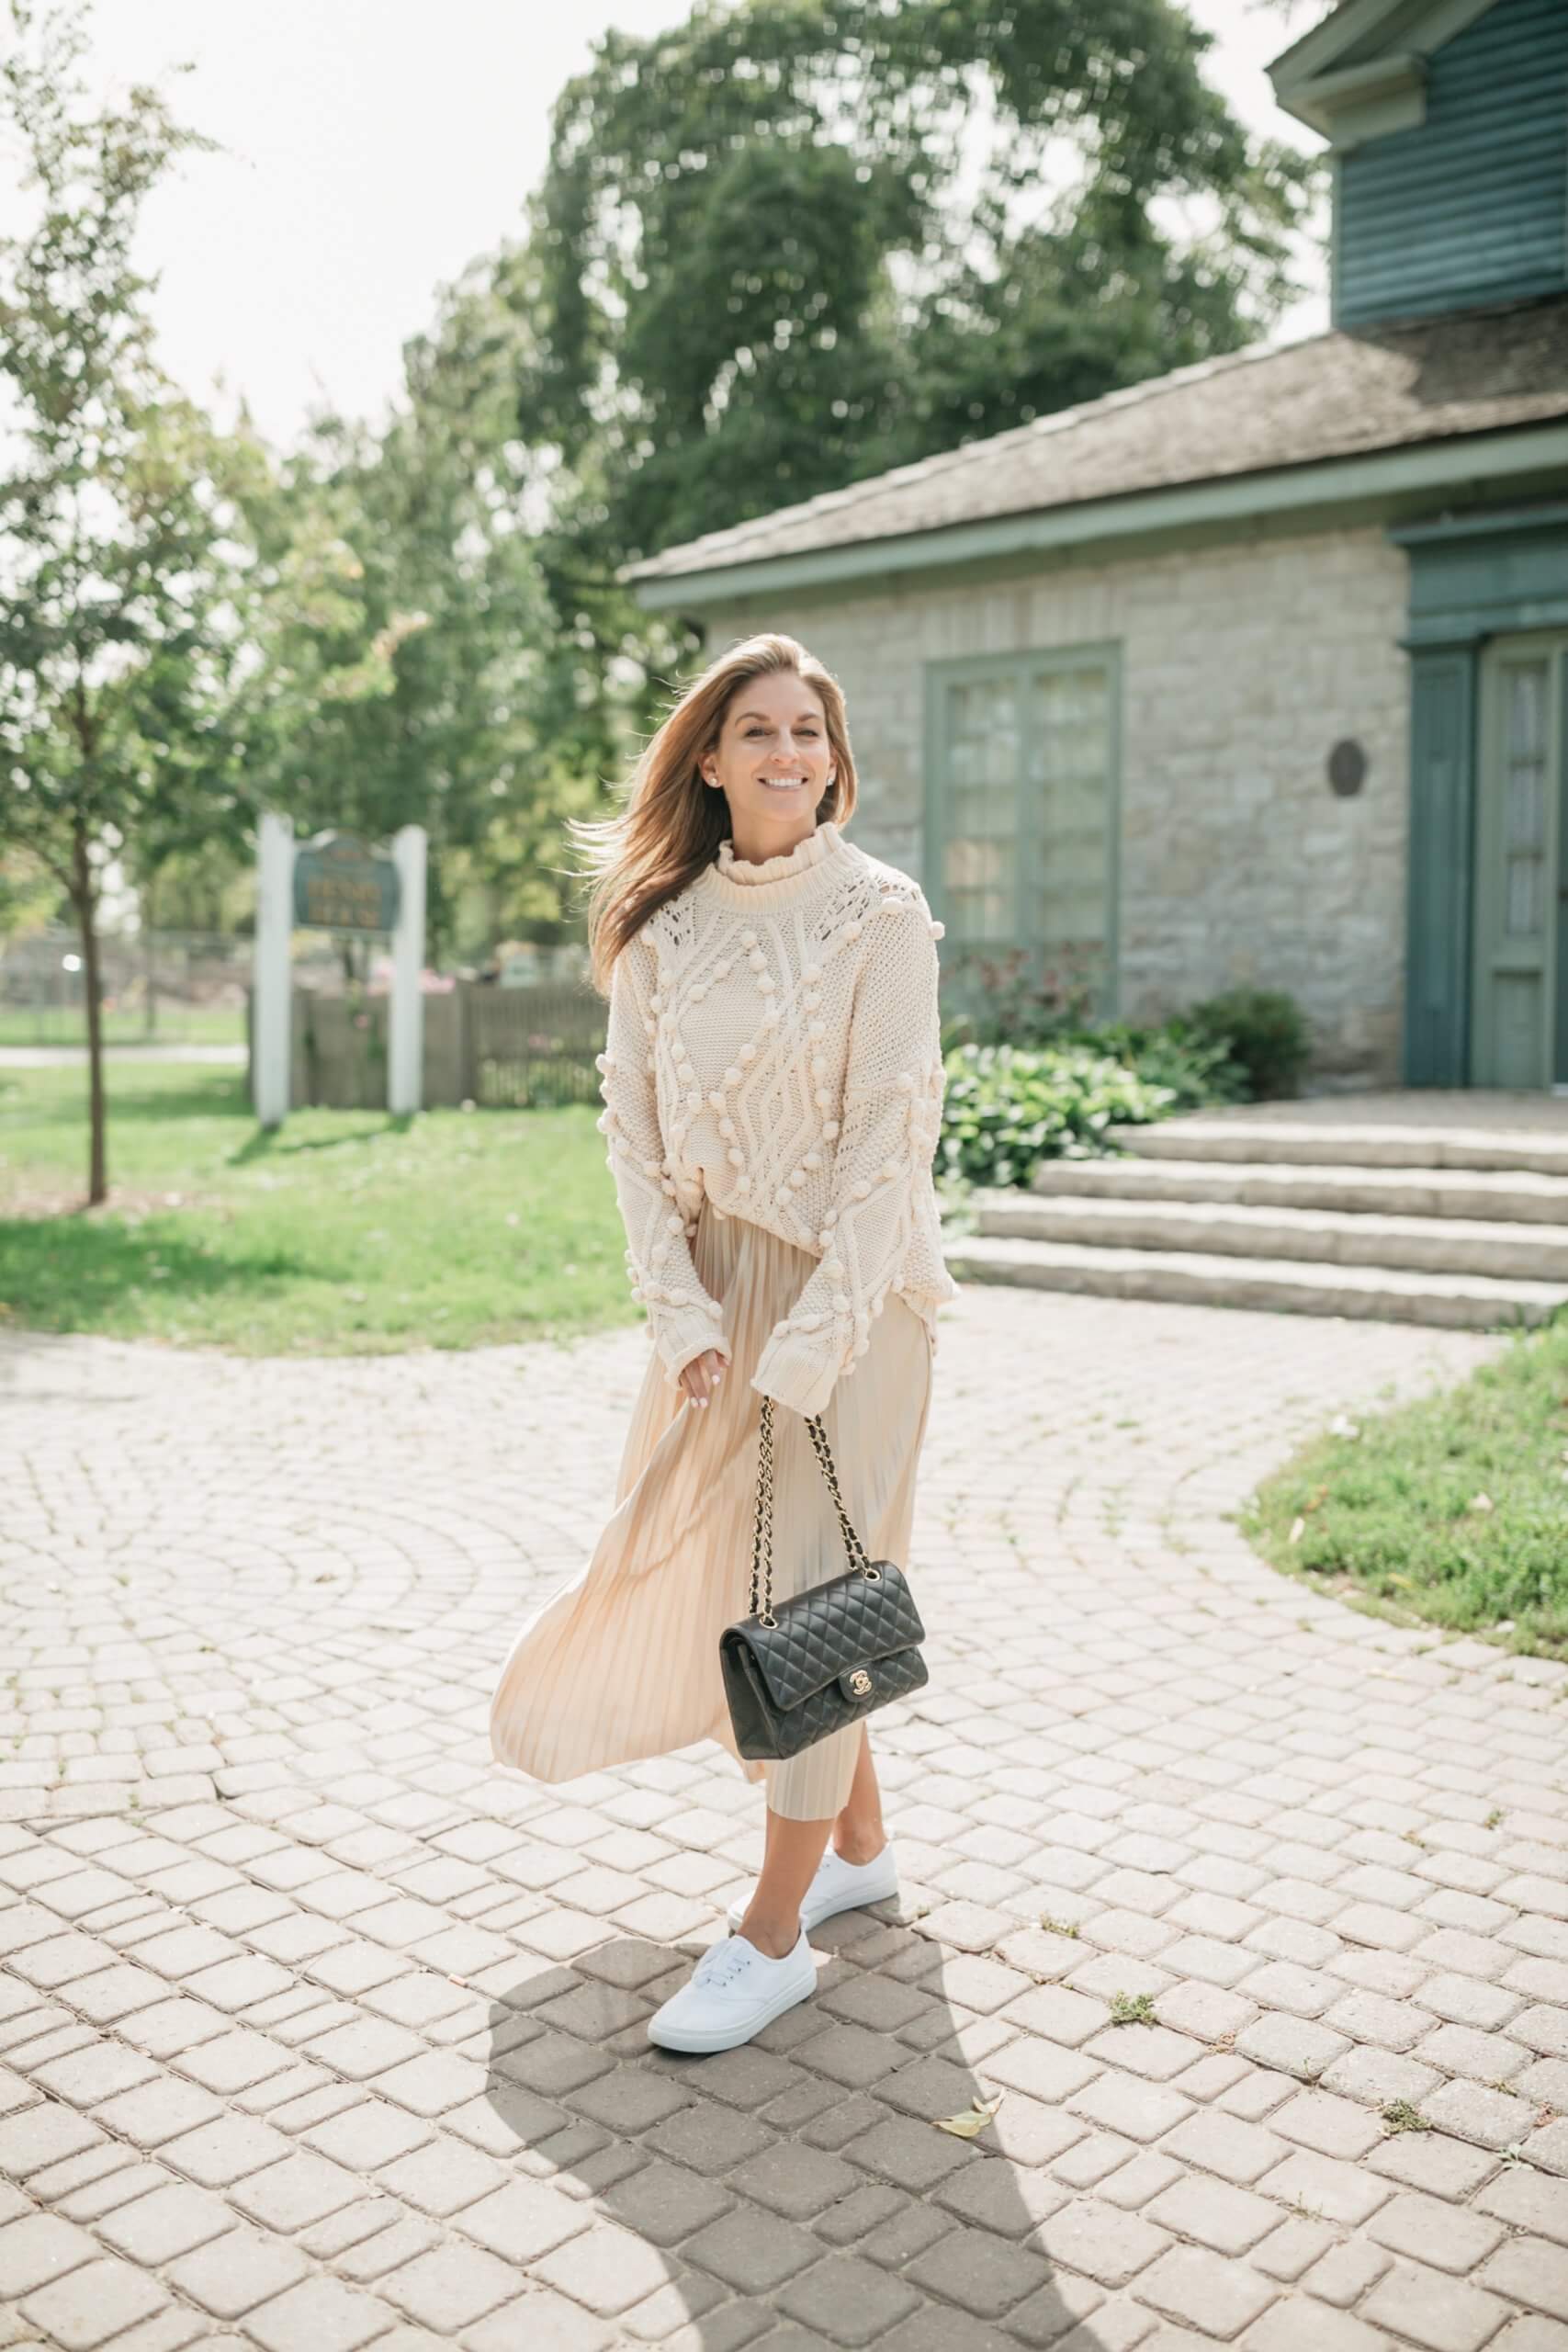 Chicwish HOLLOW OUT POM-POM CABLE KNIT SWEATER IN CREAM; chicwish FULL PLEATED MIDI SKIRT IN CHAMPAGNE; Fall look with maxi skirt; chanel flap bag; sparkleshinylove  